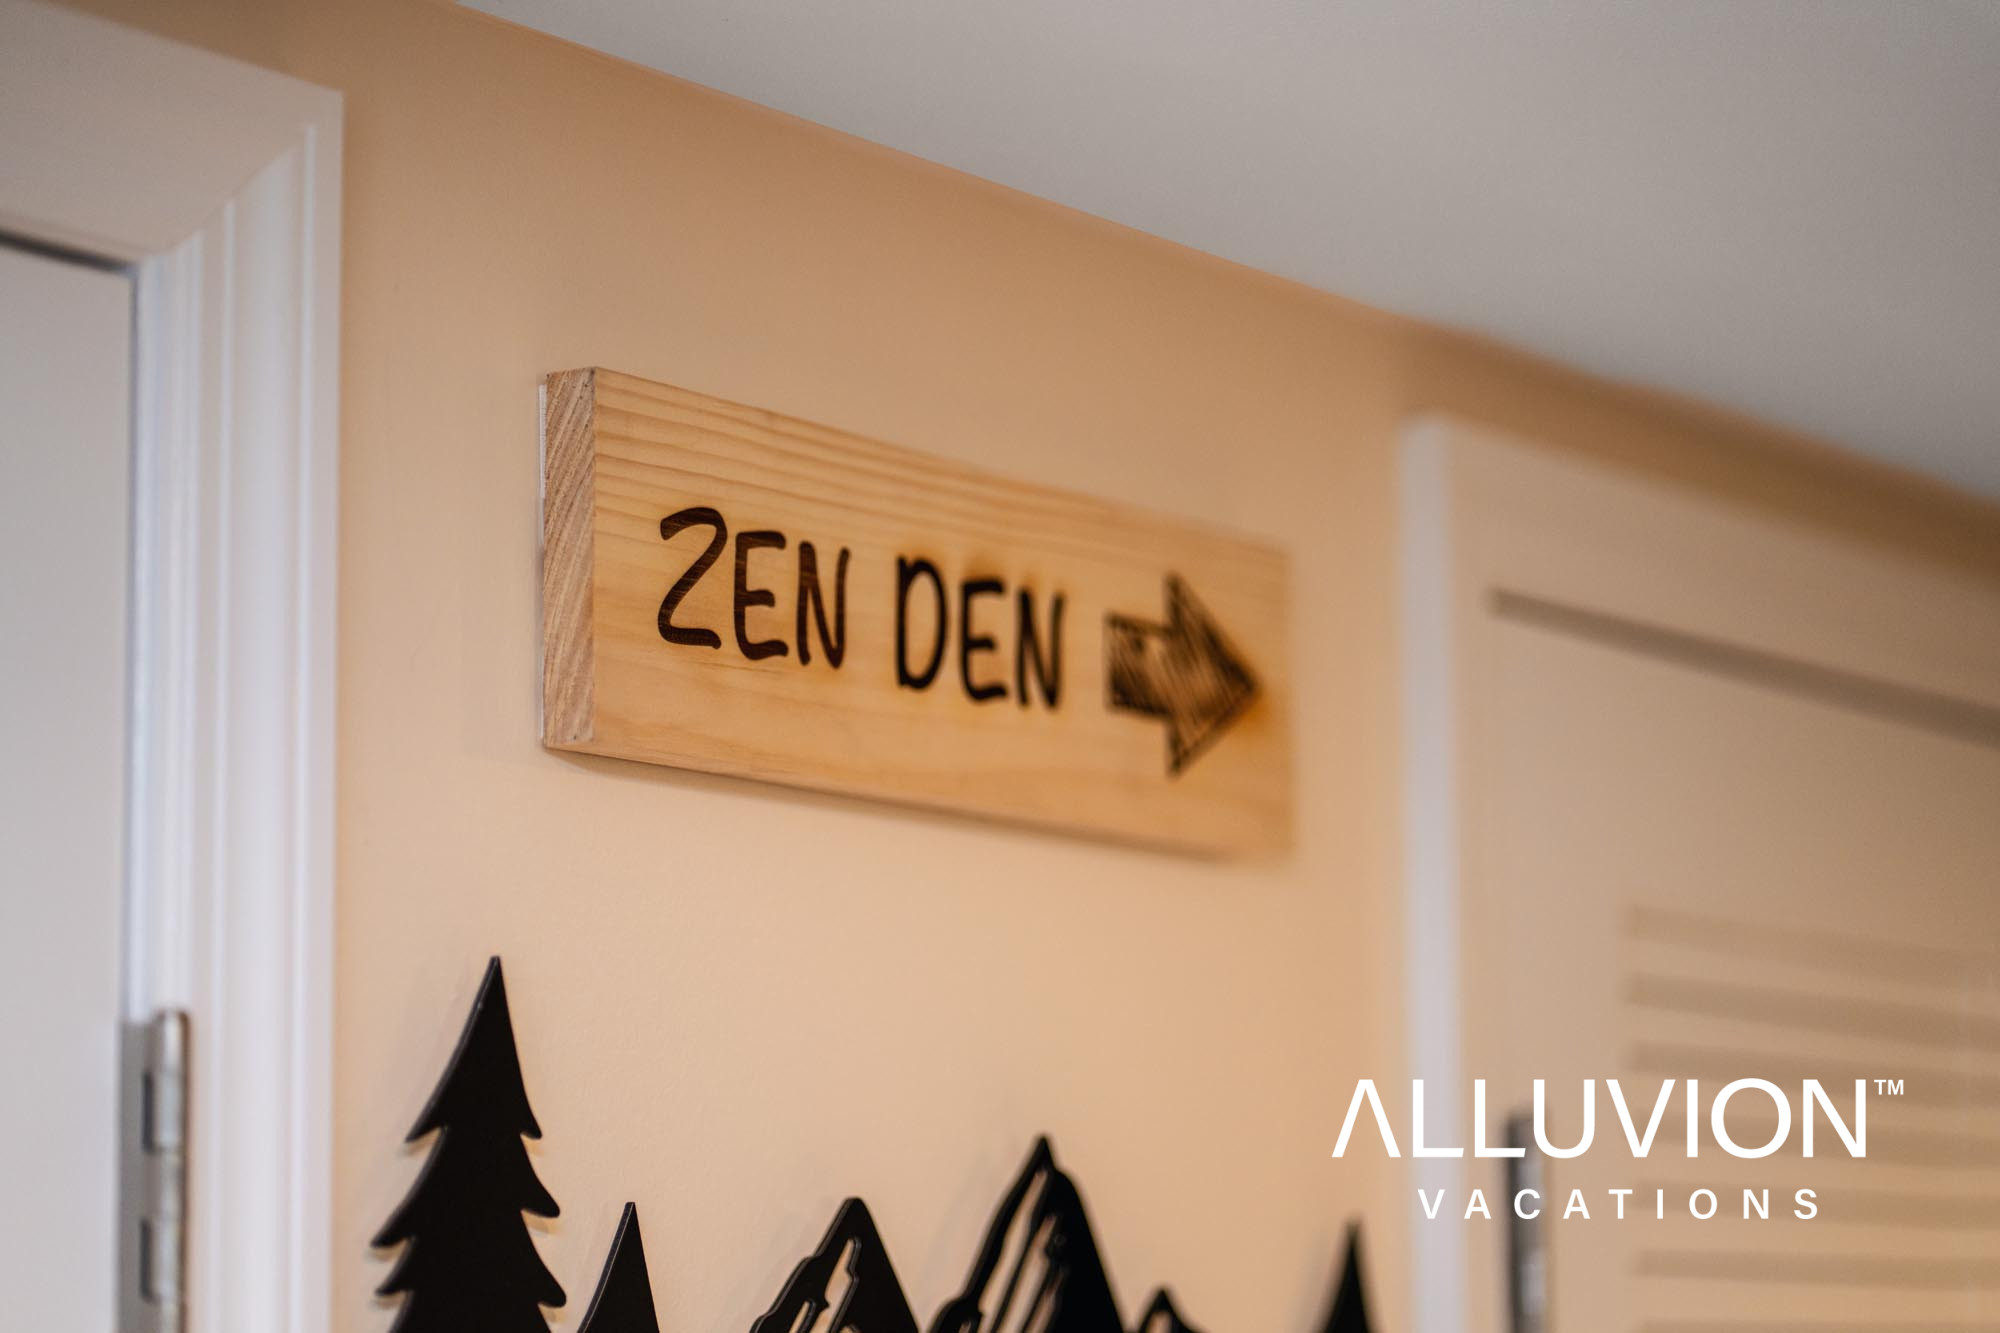 Zen Den: A Cozy, Pet-Friendly Airbnb Retreat Surrounded by Vienyards and Shwangunk Mountains in New Paltz, NY – Hudson Valley Airbnb Reviews – Presented by Alluvion Vacations